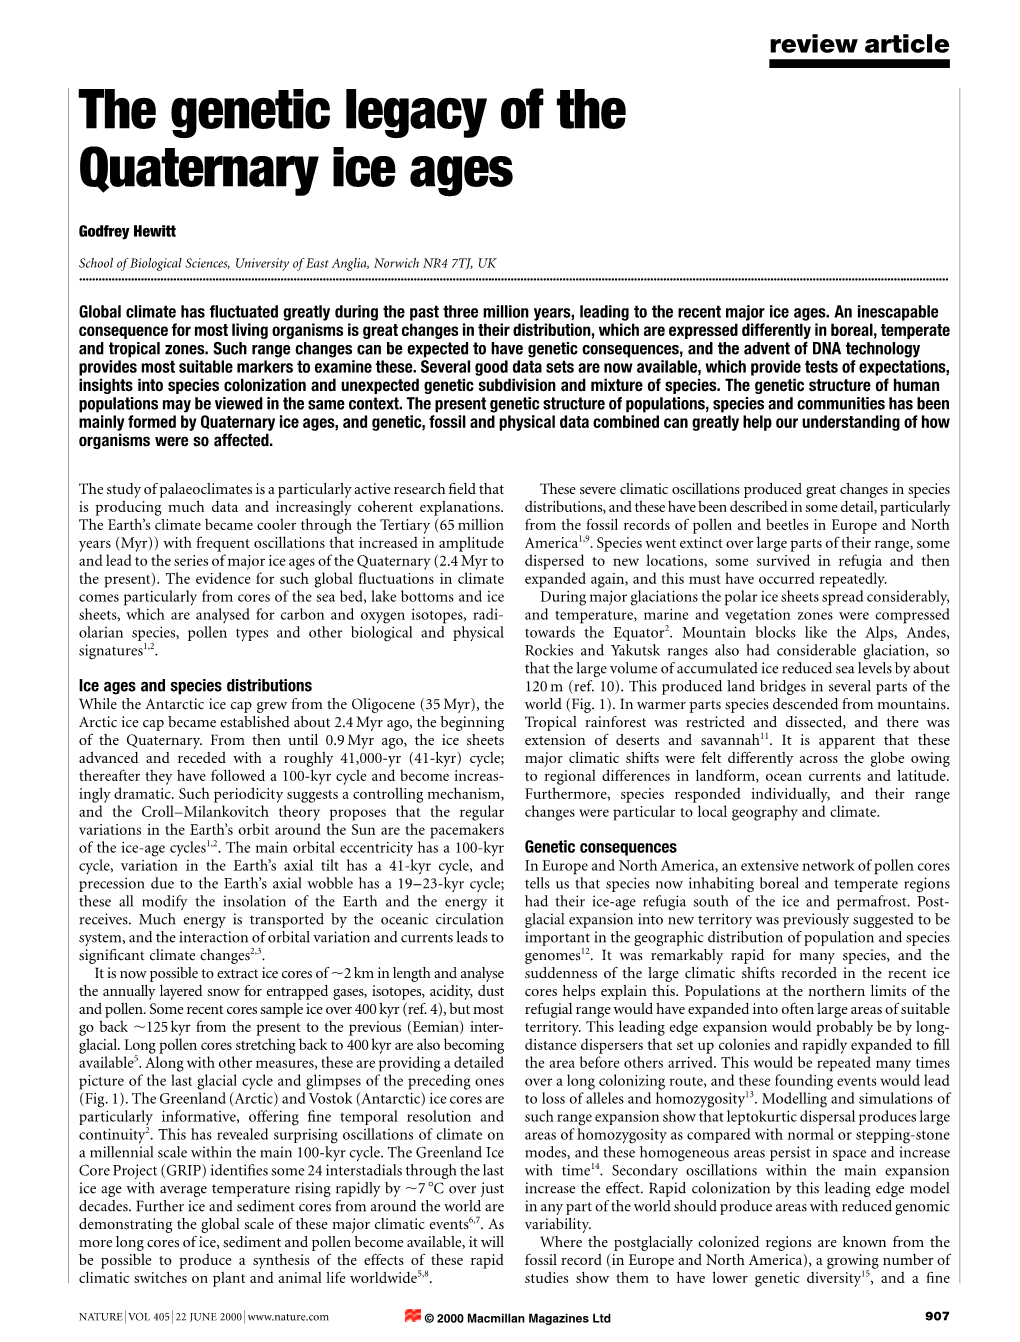 The Genetic Legacy of the Quaternary Ice Ages